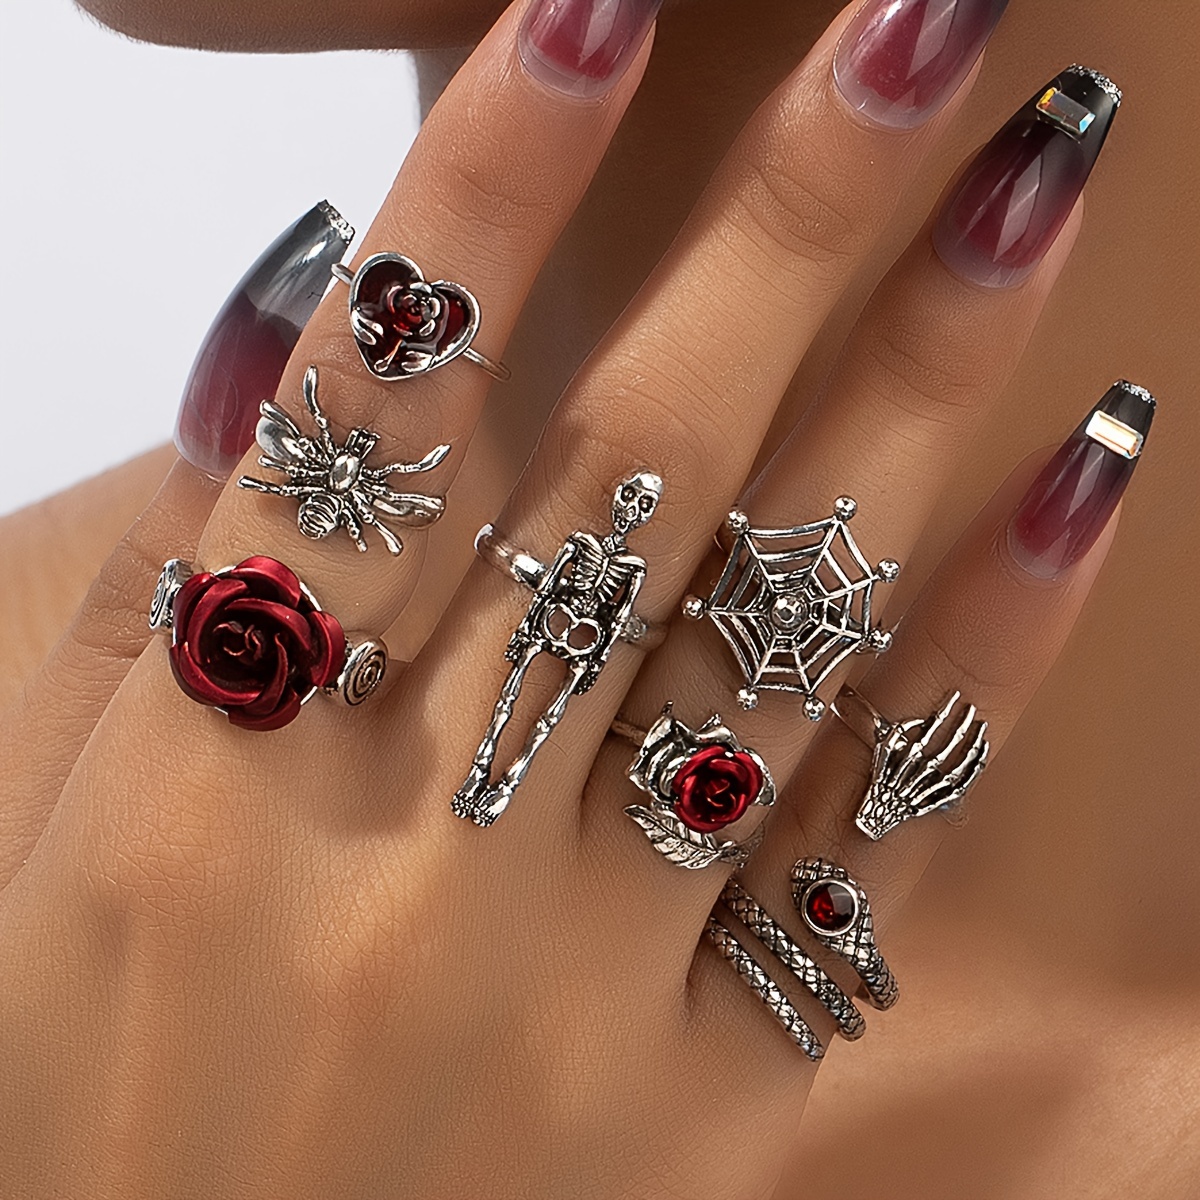 

8pcs Gothic Style Stacking Rings Trendy Skeleton Bloody Rose Snake Spider Web Design Mix And Match For Daily Outfits Suitable For Men Women Halloween Decor